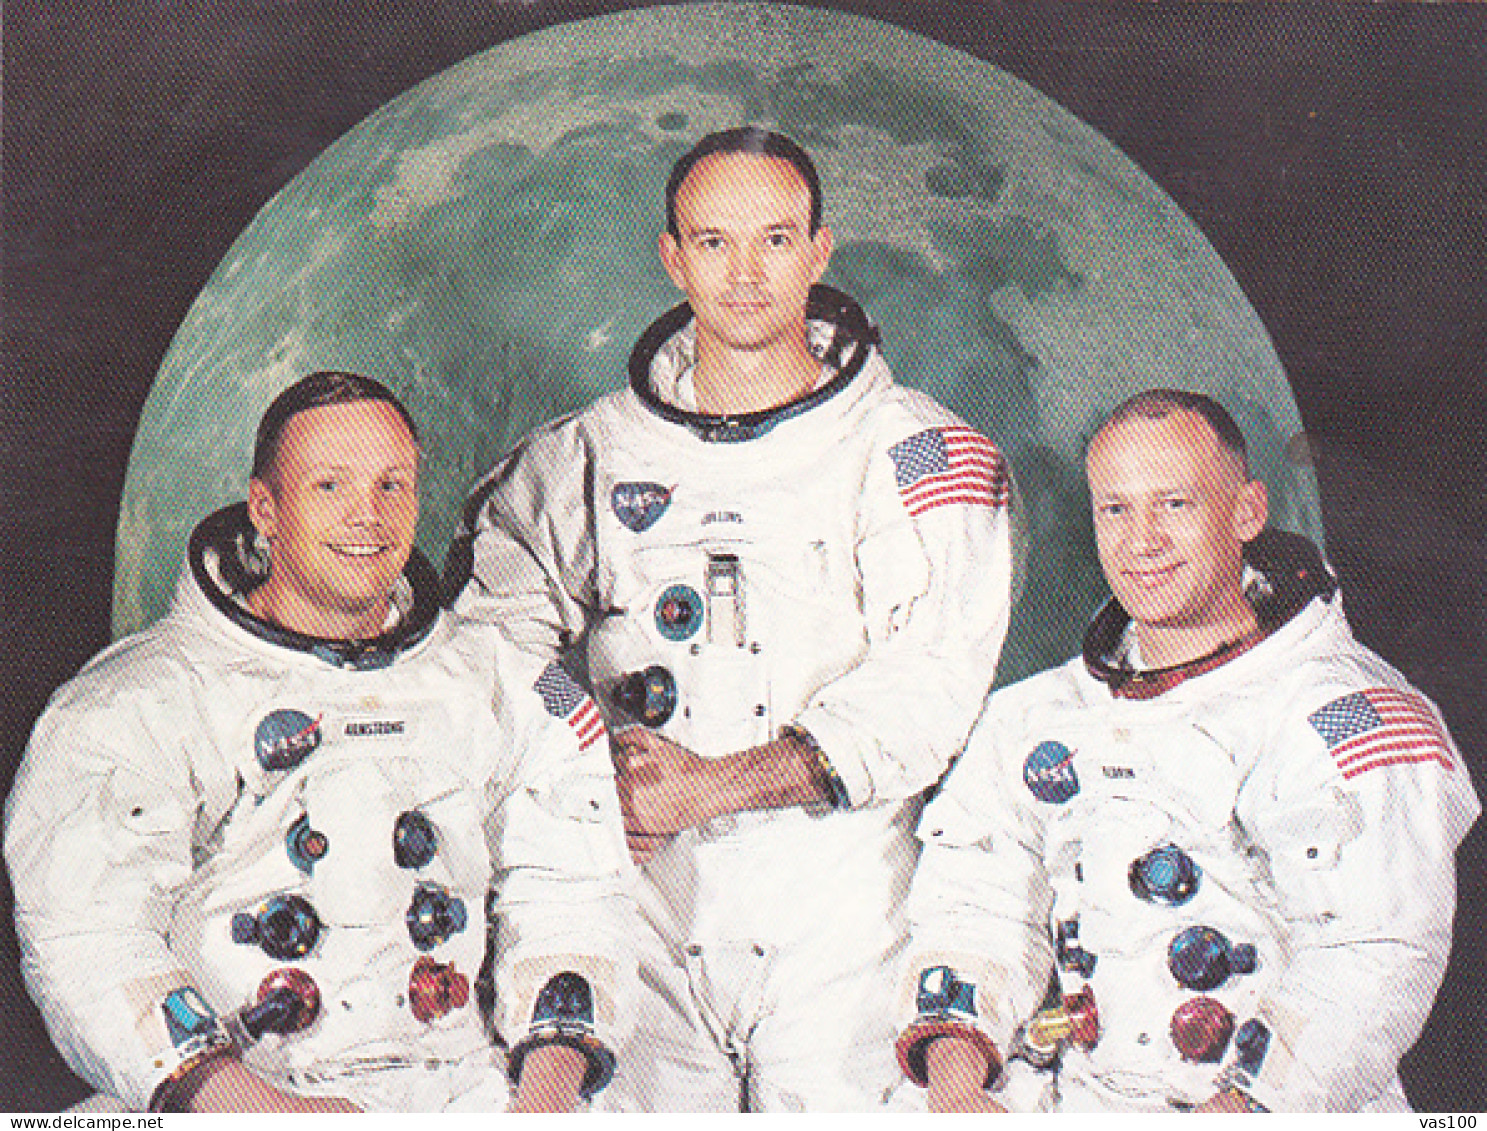 CPA TRANSPORTS, AVIATION, SPACE, COSMOS, APOLLO 11 CREW, FIRST STEP ON THE MOON - Espace